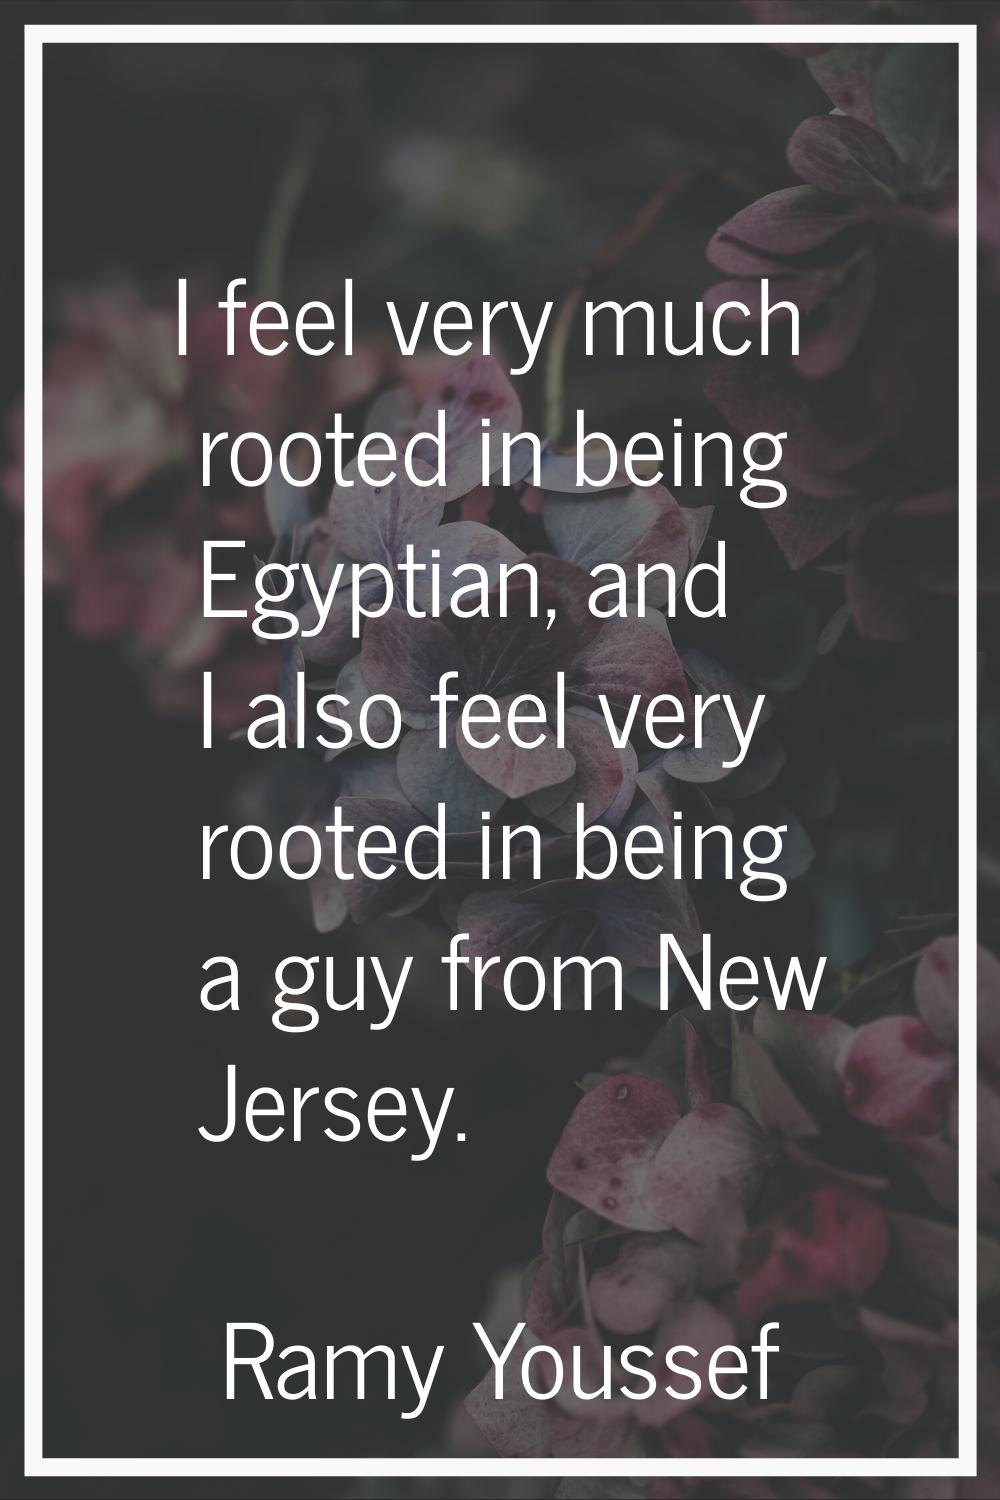 I feel very much rooted in being Egyptian, and I also feel very rooted in being a guy from New Jers